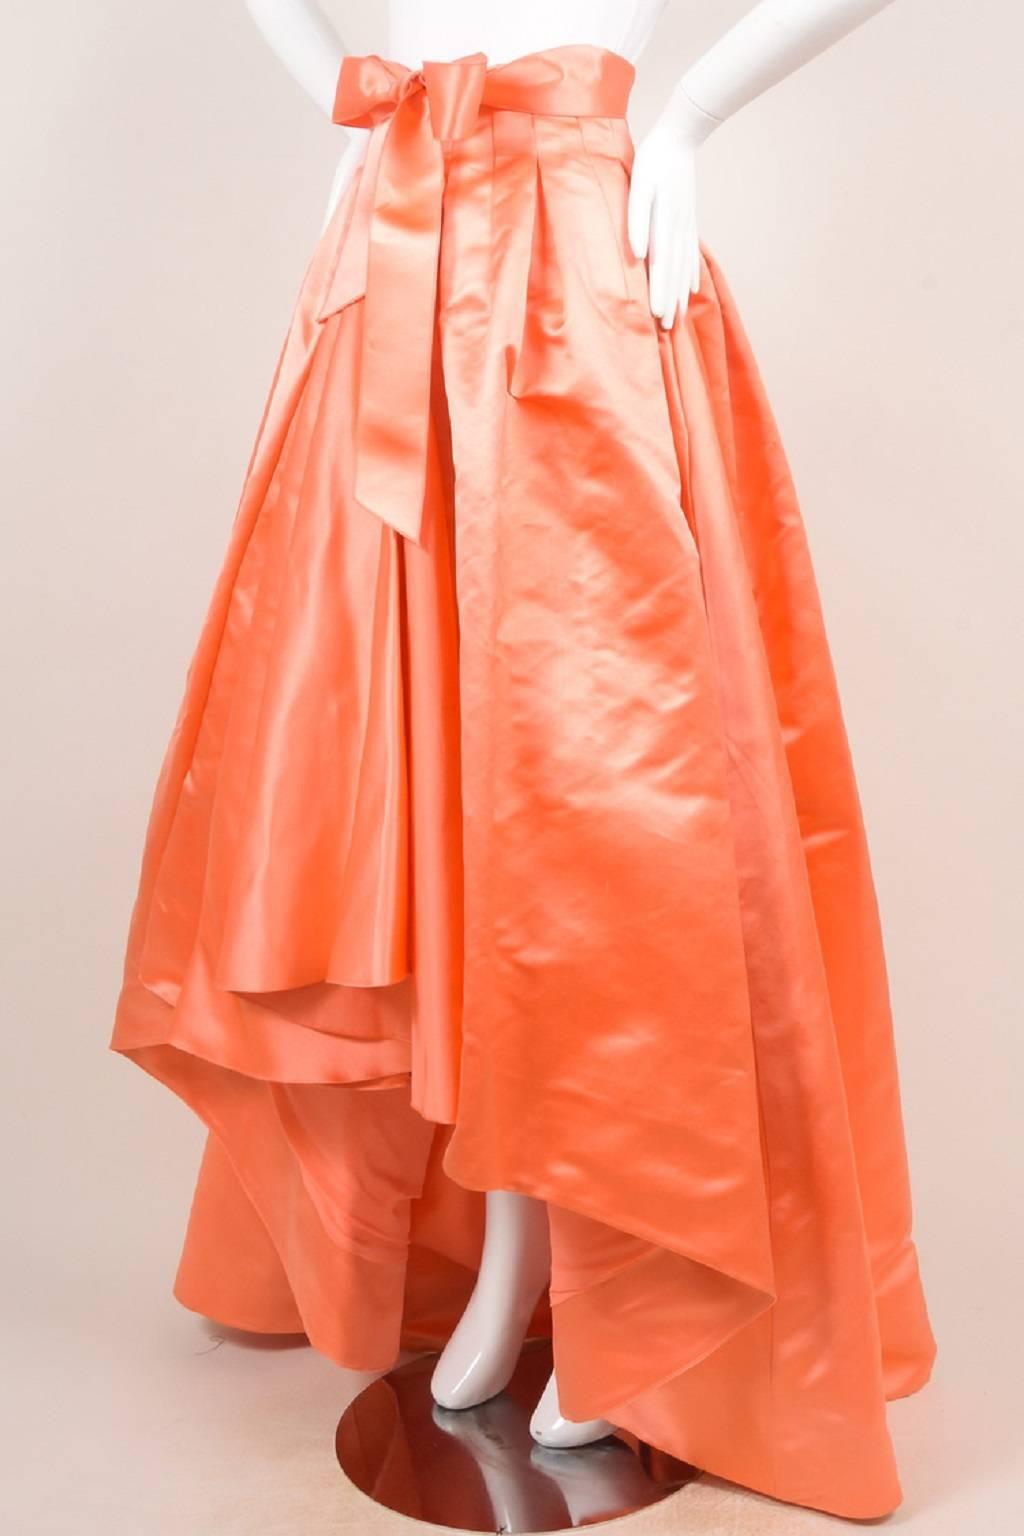 Ball skirt from Pre-Fall 2013 Collection. As seen on Jennifer Lopez. Coral silk. Pleated waist. High Low hemline. Ties at front waist. Back zipper with hook and eye closure. Lined.

Size: 6 (US); 38 (F); 10 (GB); 42 (I) 36 (D)
Color: Orange,
Style: